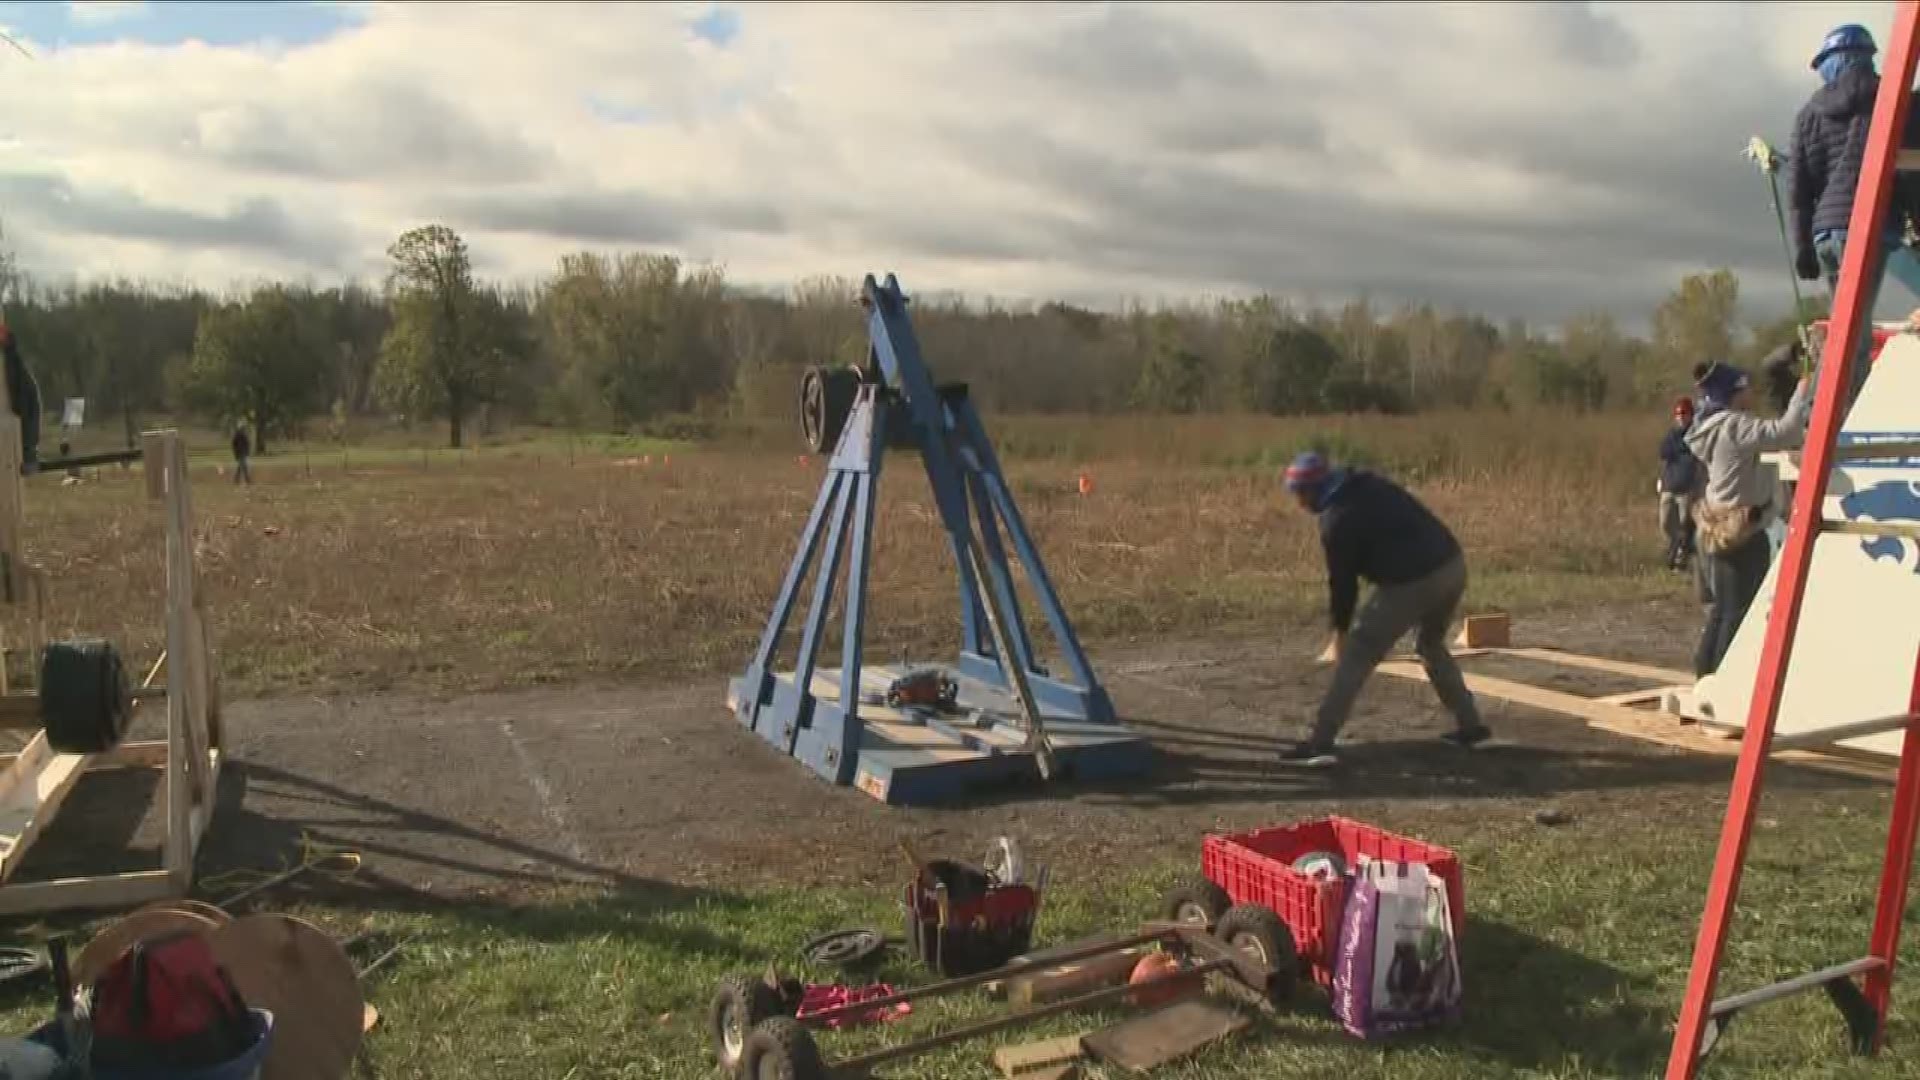 Students compete in Pumpkin Launching contest